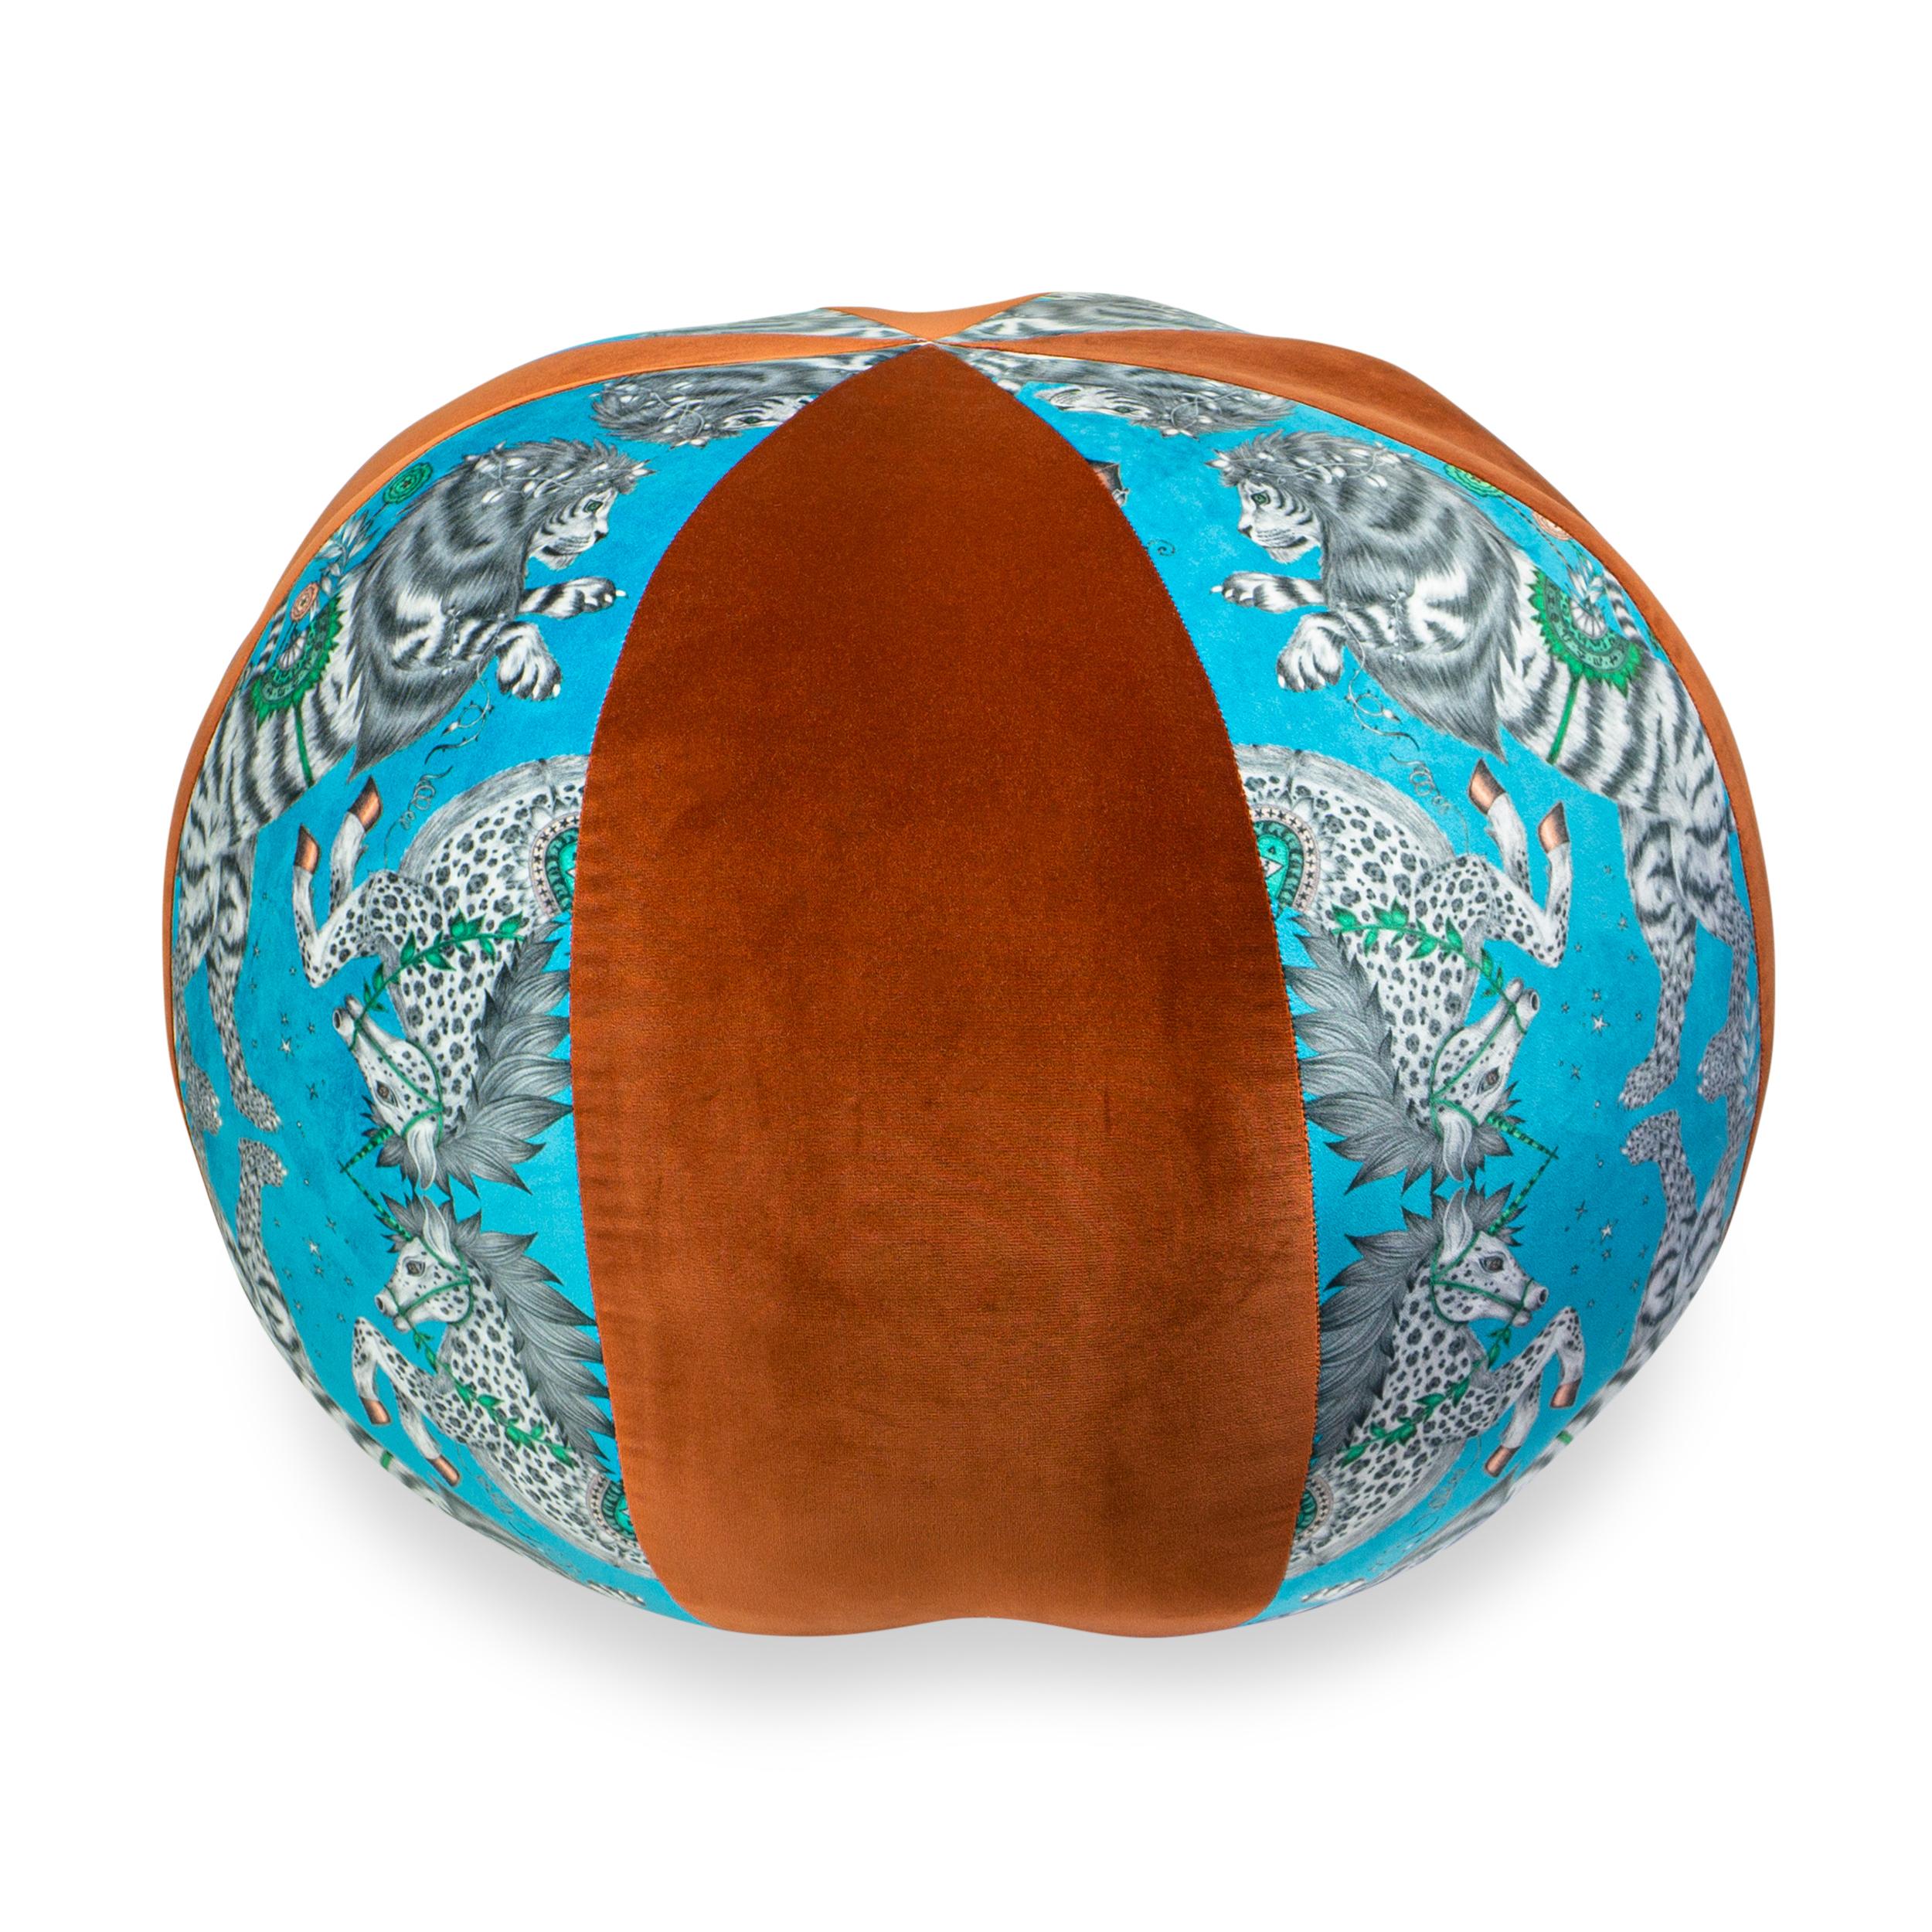 Contemporary Fantastical Beach Ball Pouf with Emma Shipley Printed Velvet Firm for Sitting For Sale